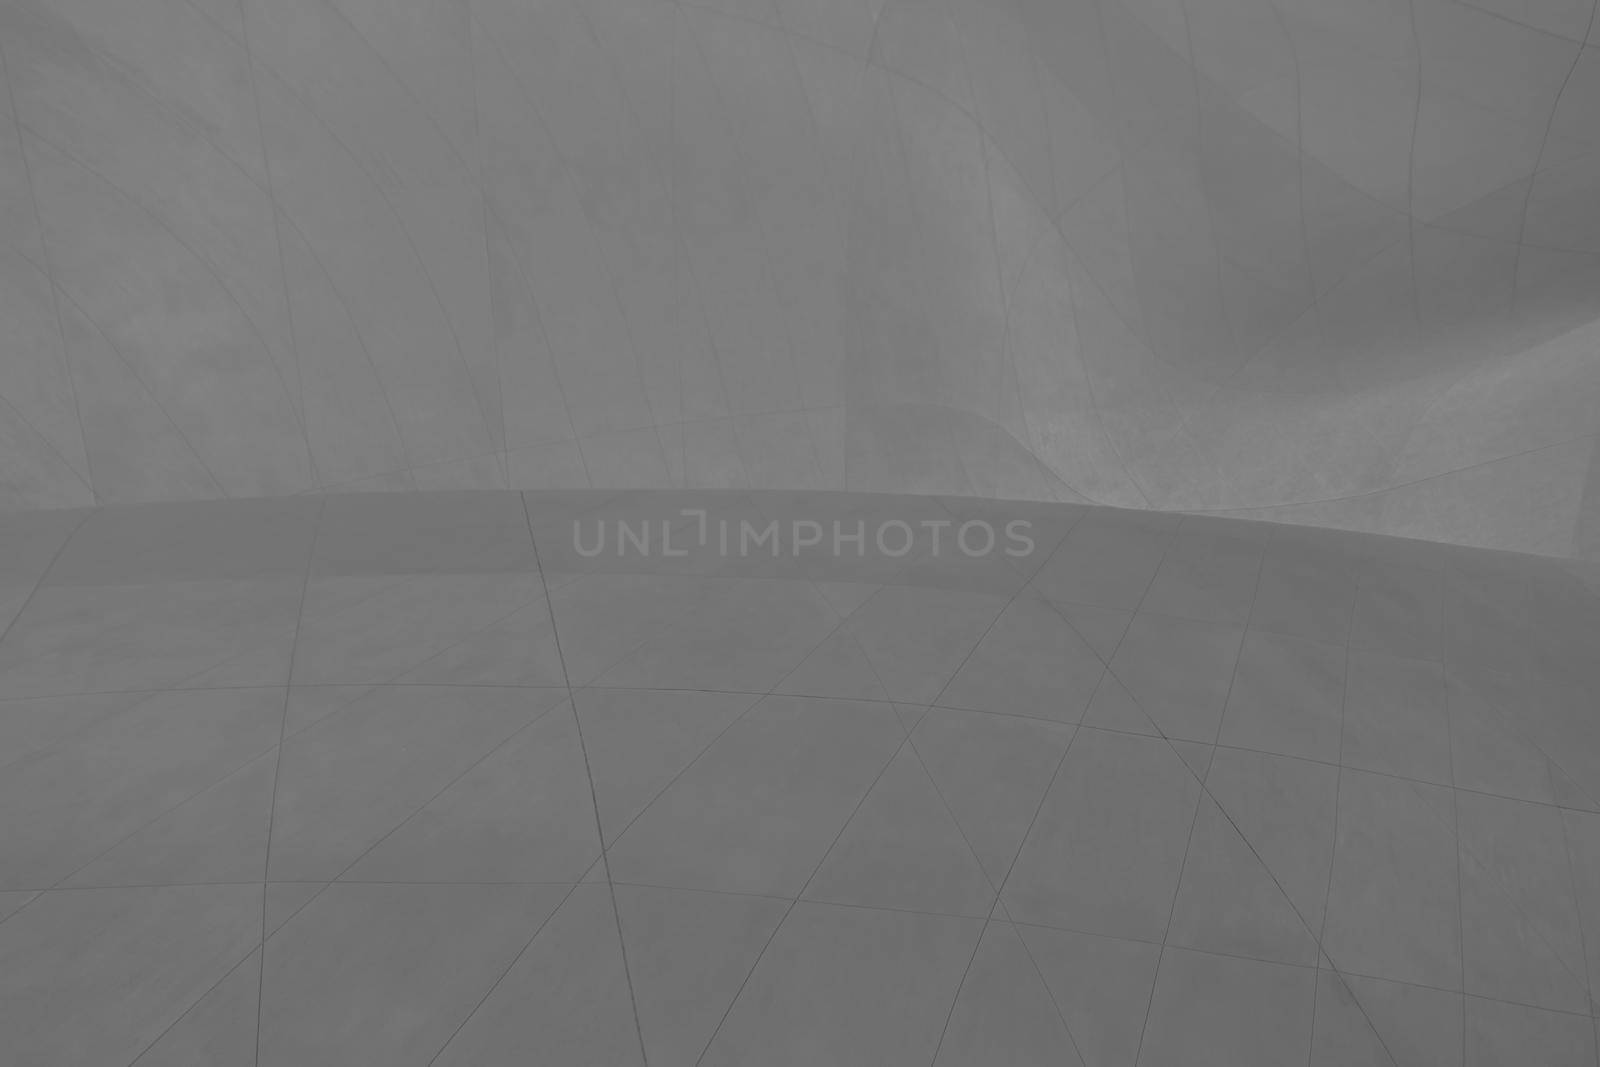 Monochrome refined fragment of contemporary public building, abstract background and interior design concept - Modern architecture details